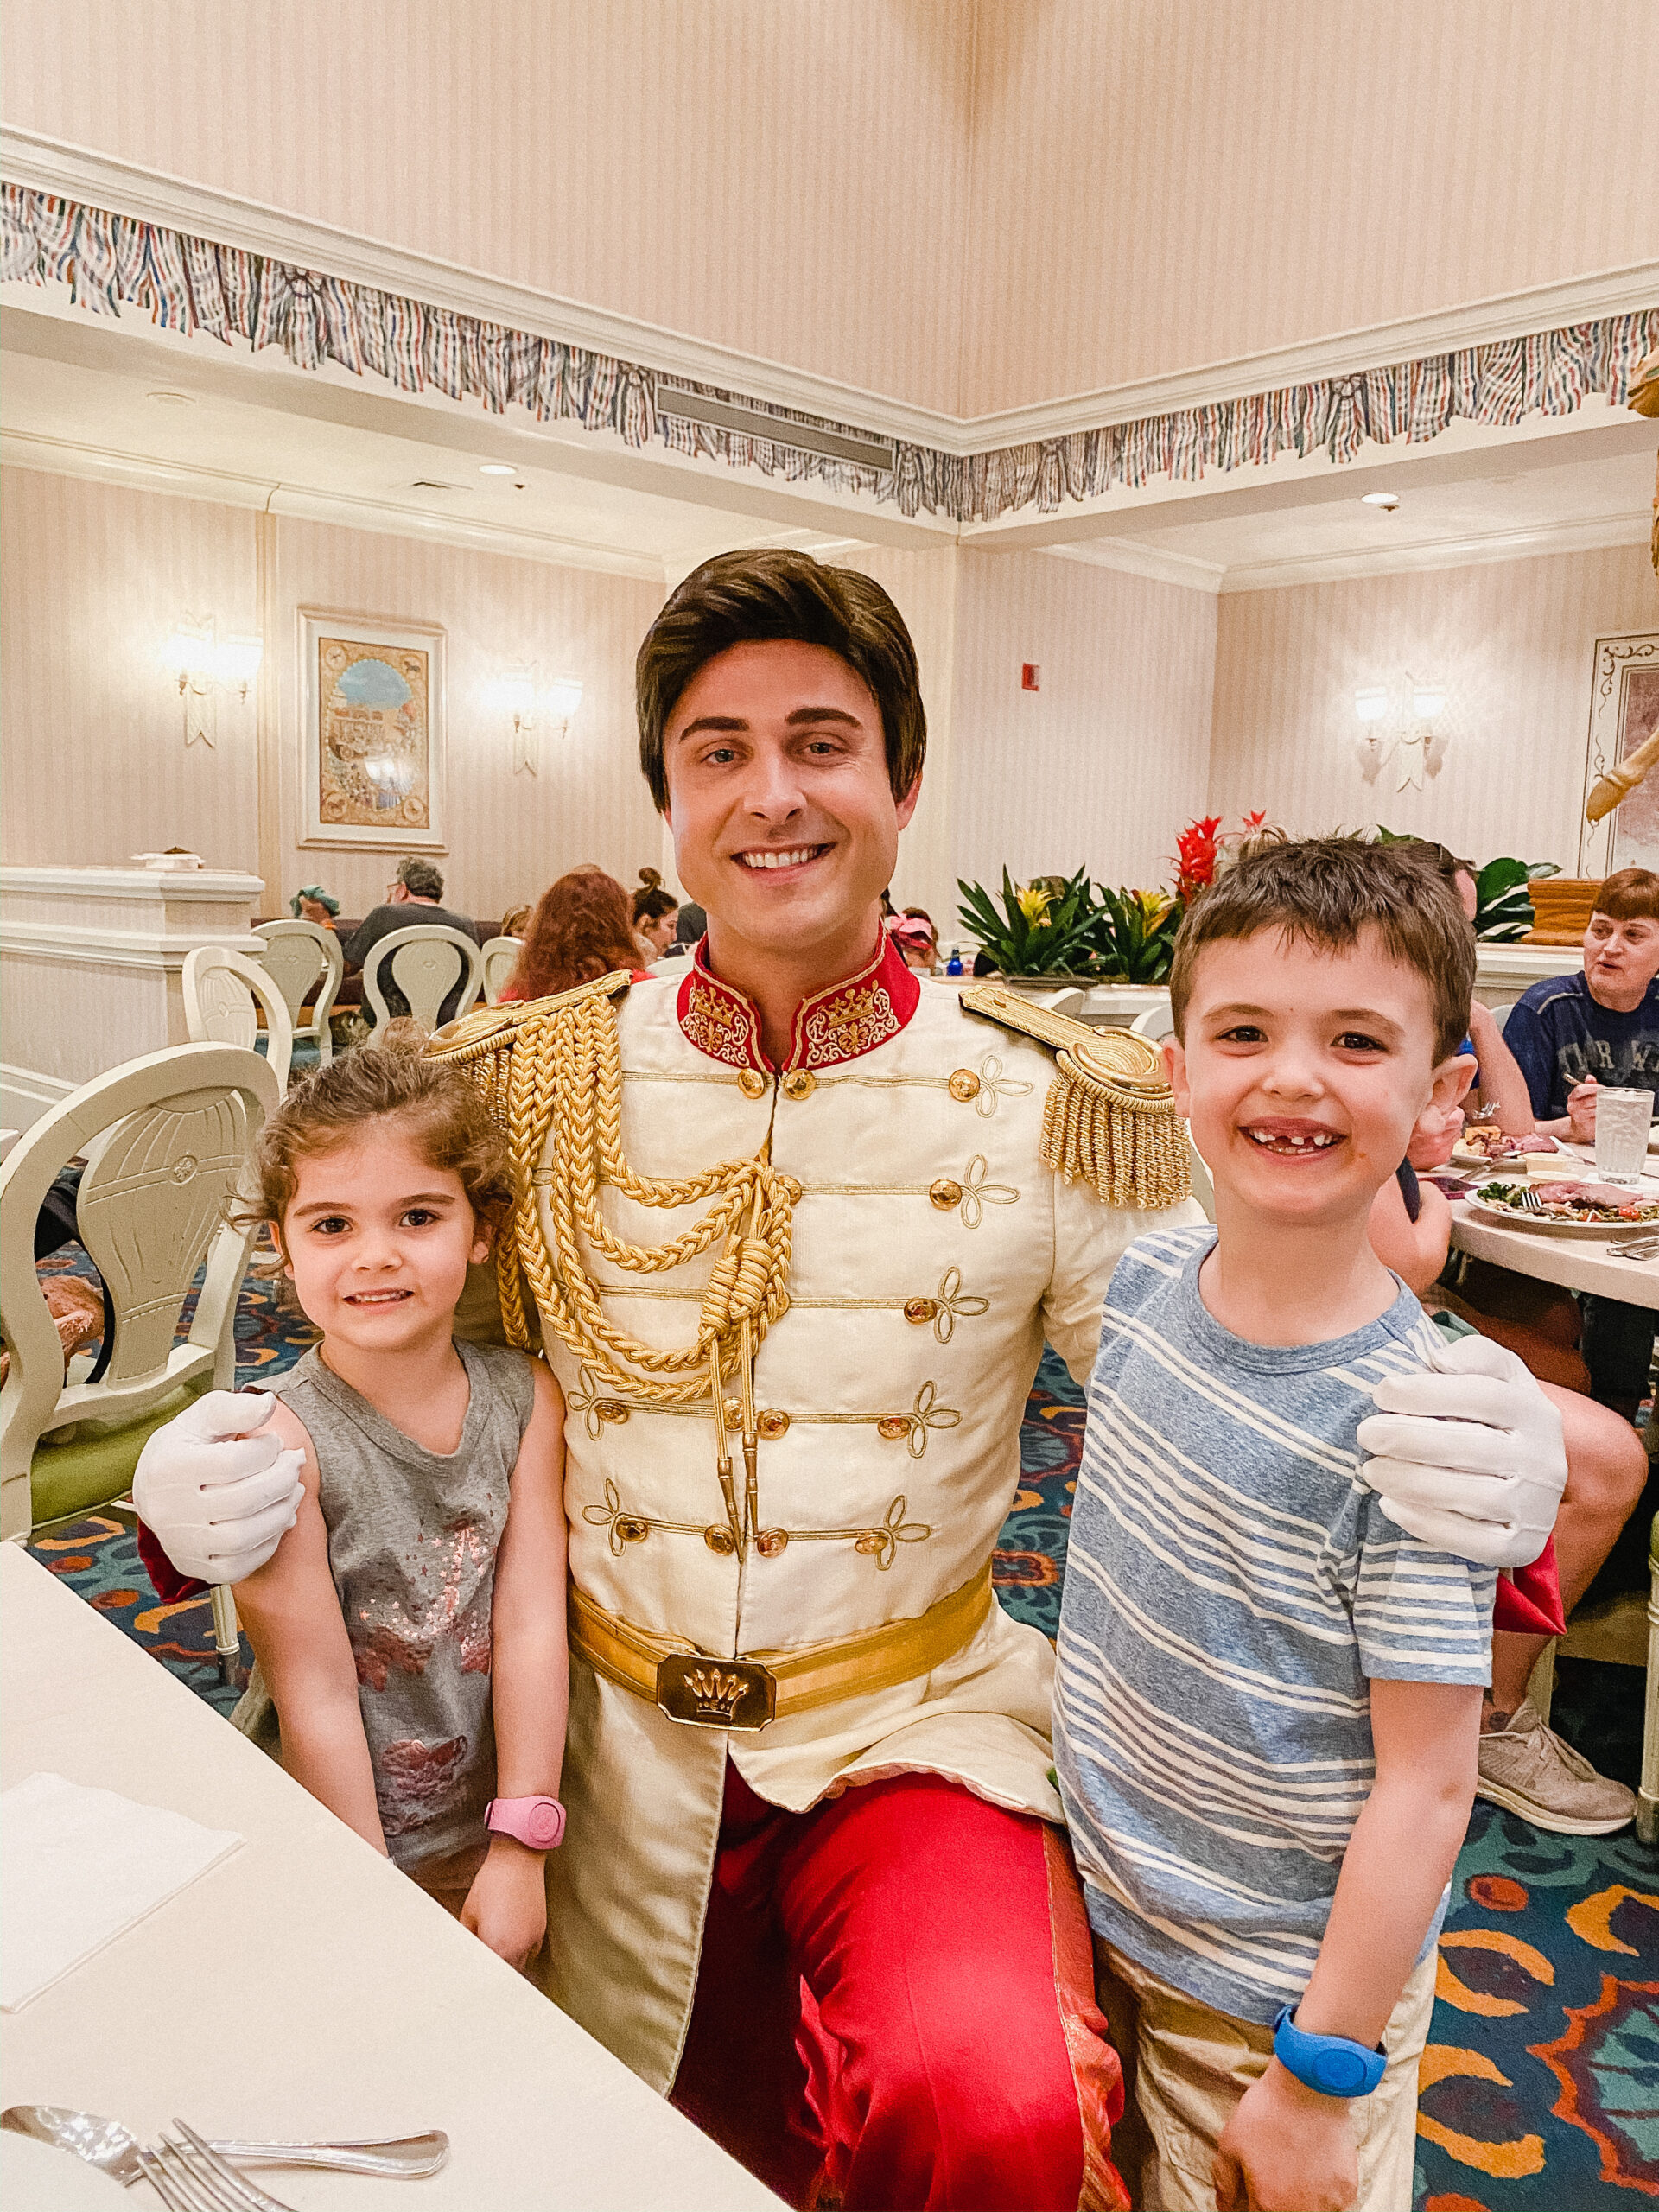 Looking for the best character dining at Walt Disney World? Connecitcut life and style blogger Lauren McBride shares her top choices.